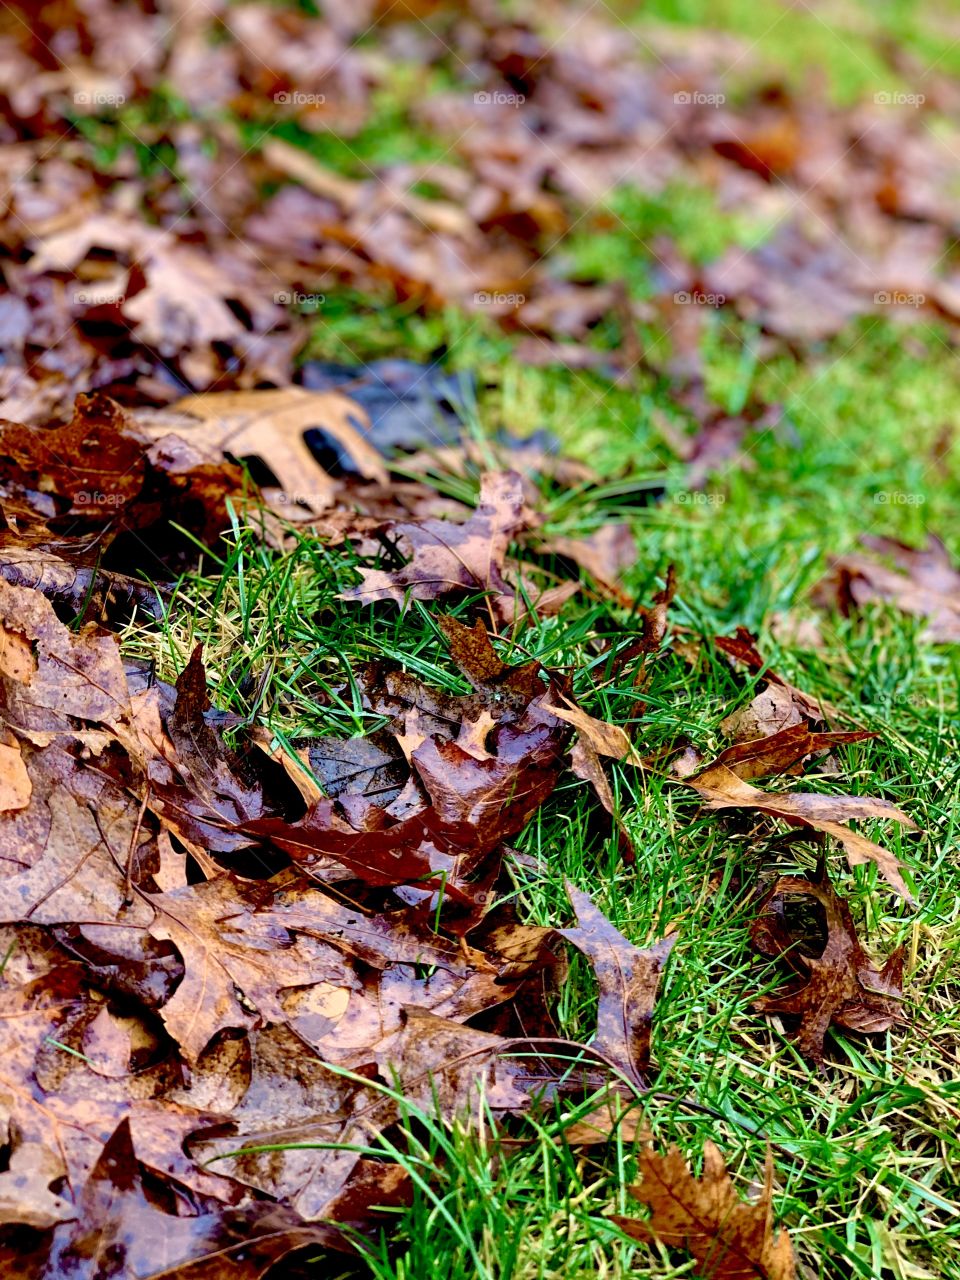 damp, fallen leaves of green grass in the fall